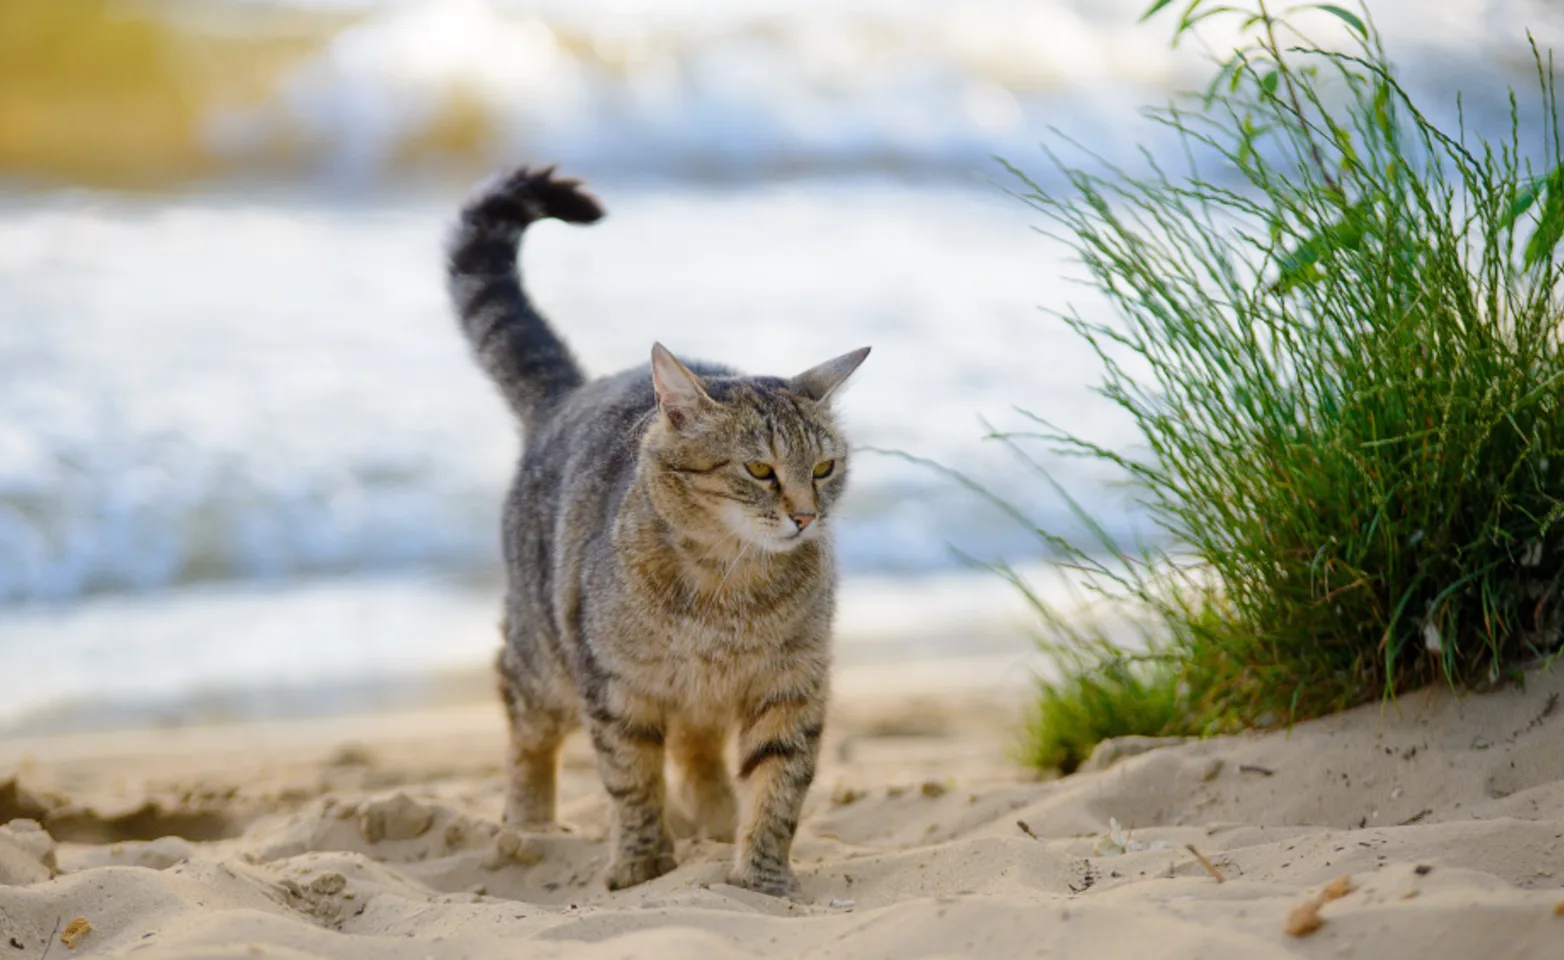 Cat walking on sand at beach with waves behind and grass on the right side